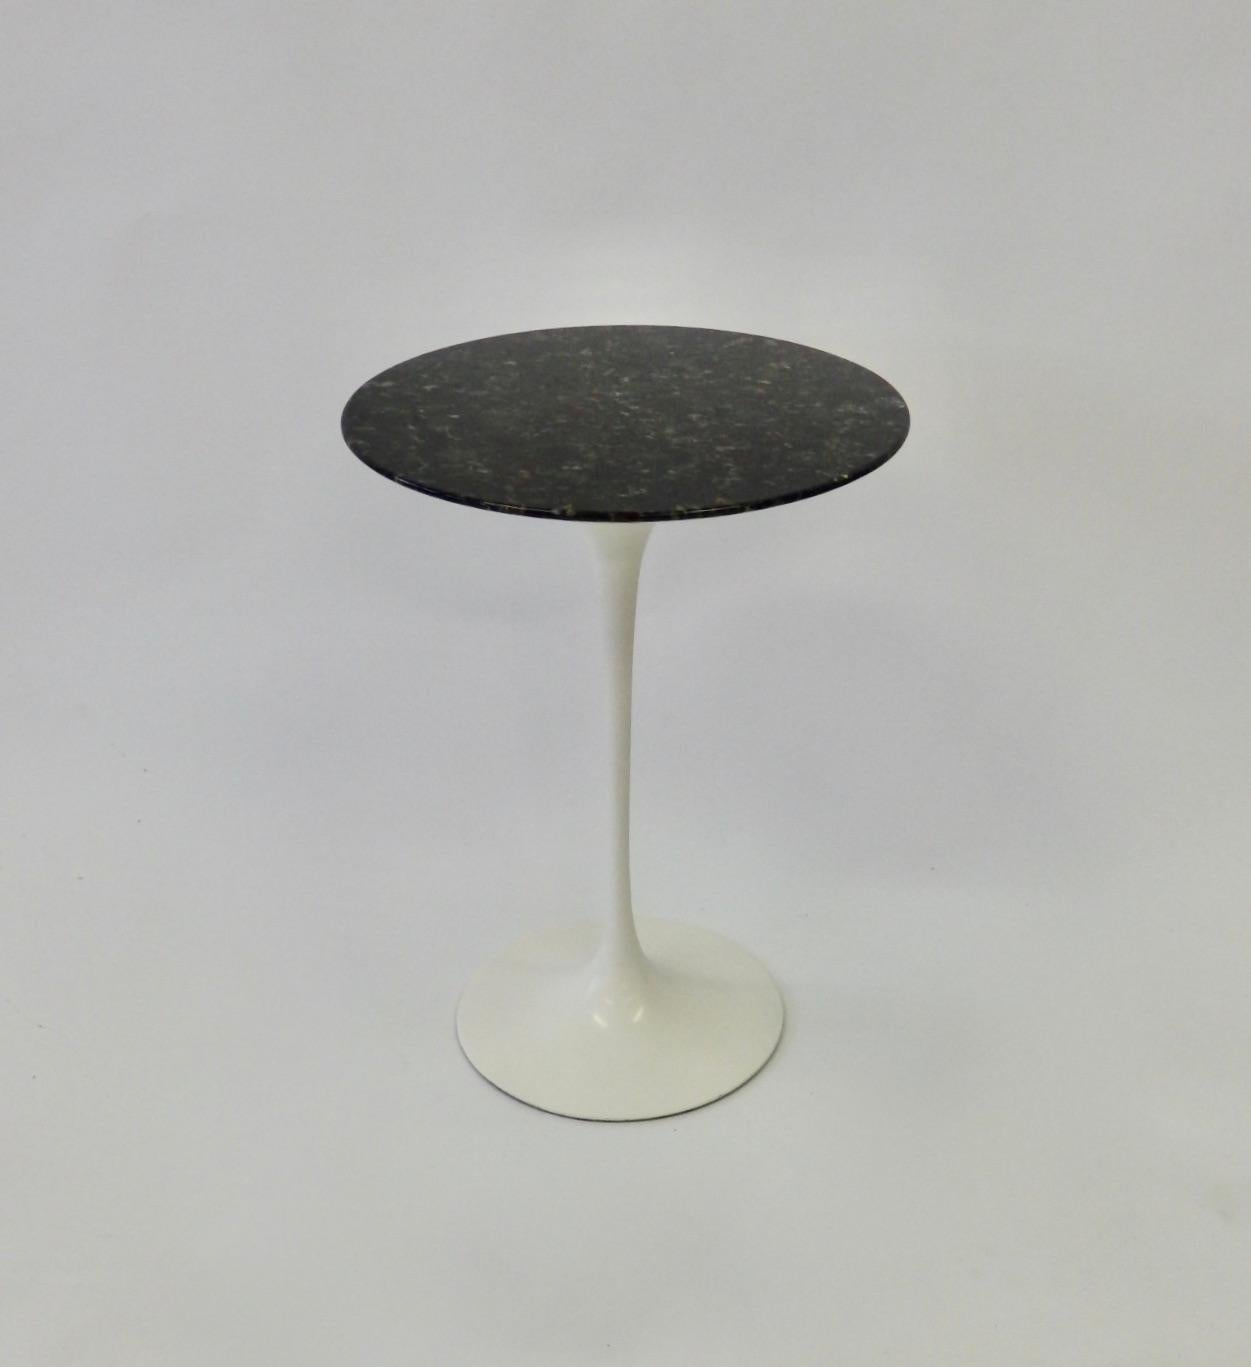 Early Knoll cast iron base with custom ordered black stone top. Eero Saarinen for Knoll Tulip group table.